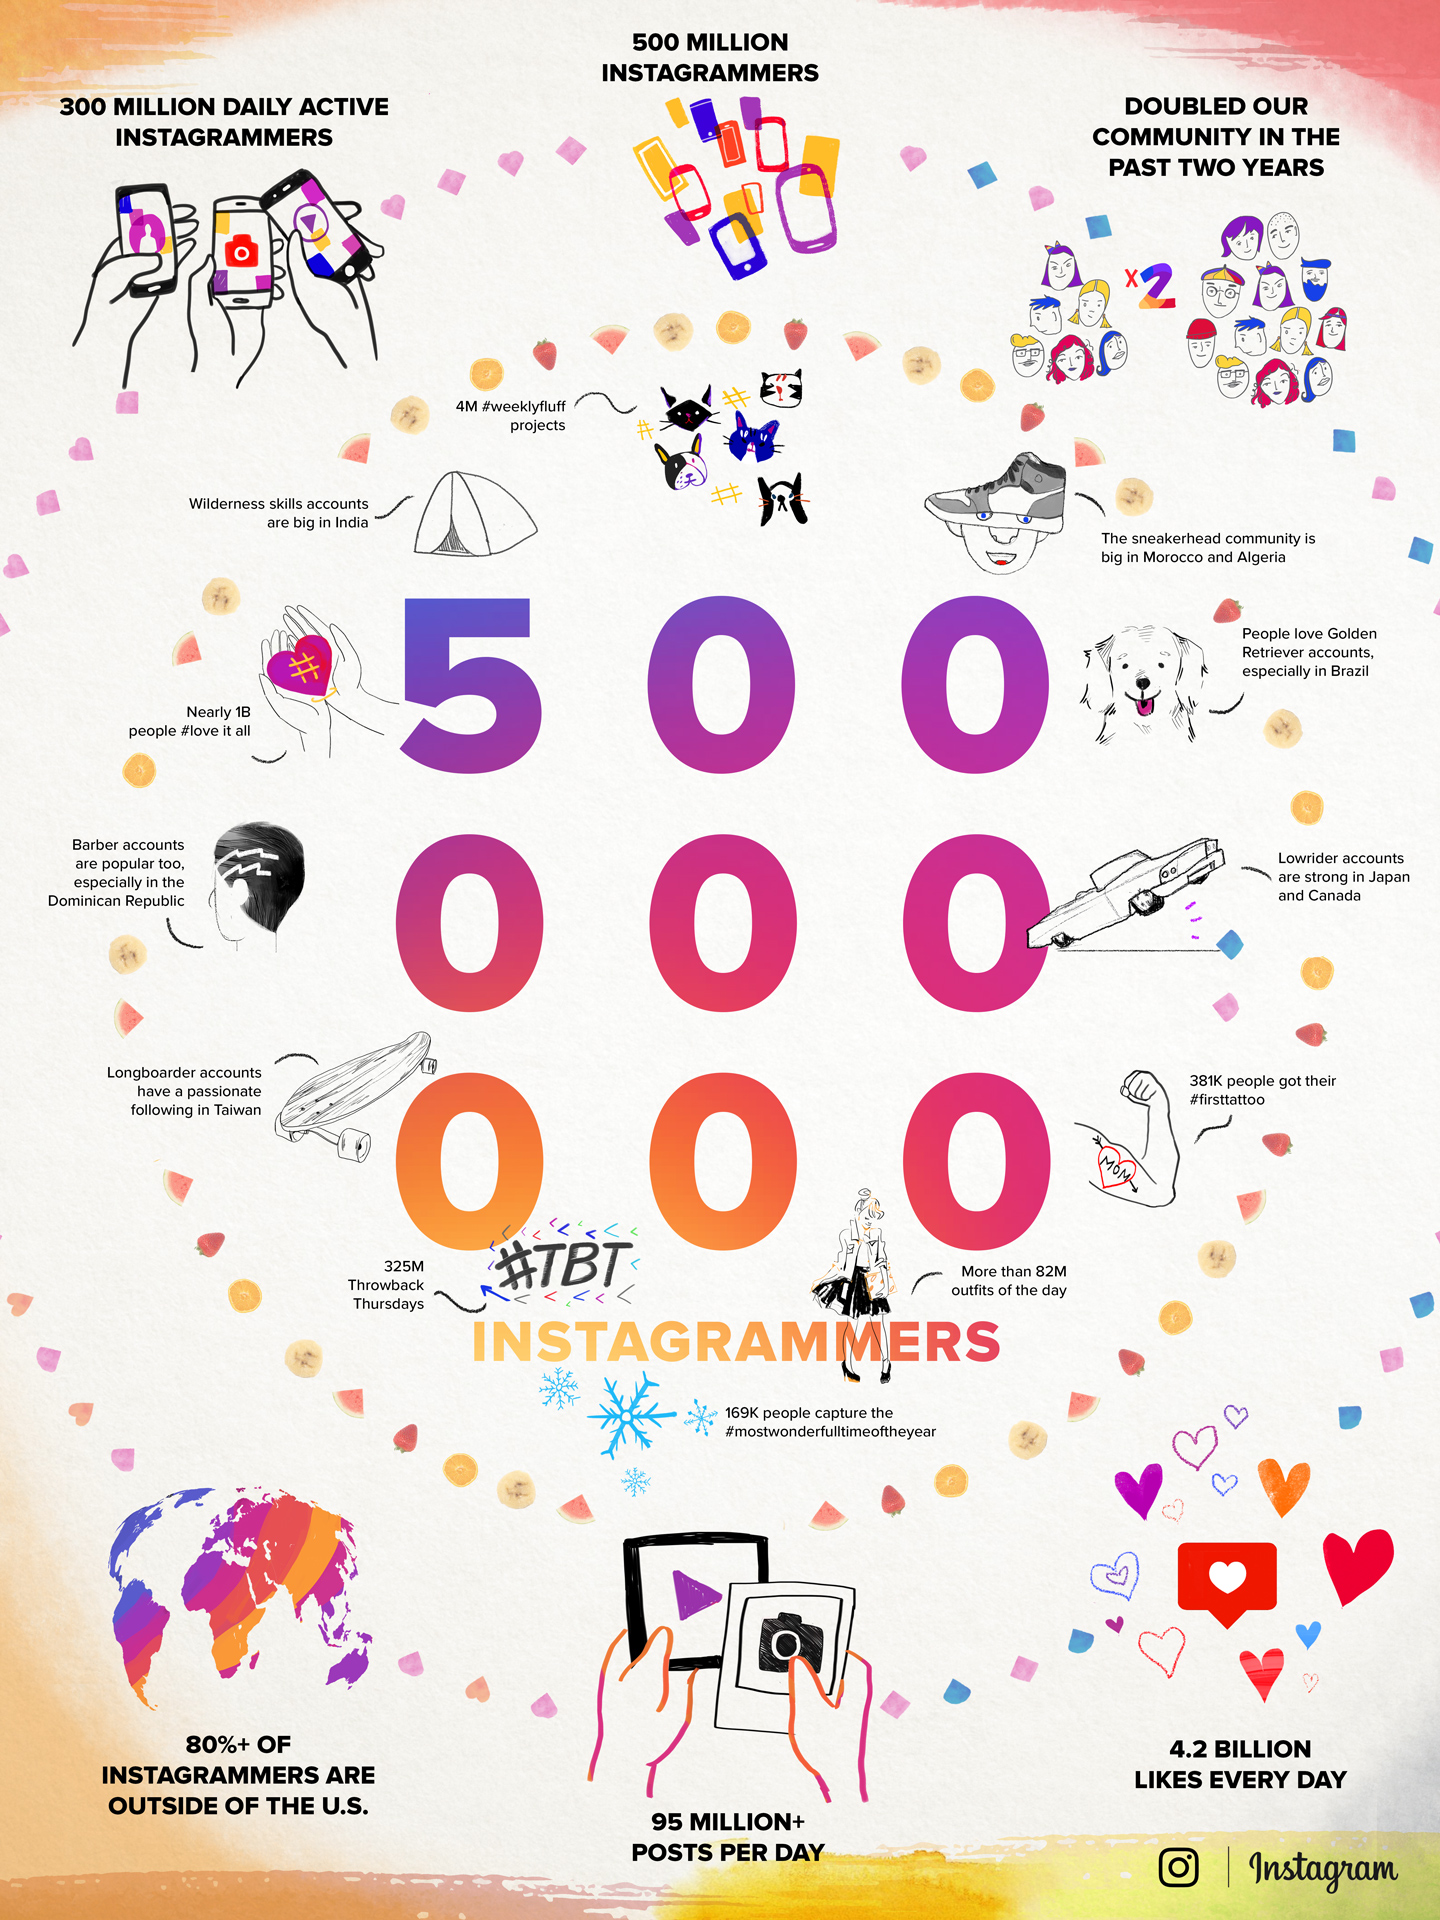 Instagram-500-million-monthly-users-infographic-001